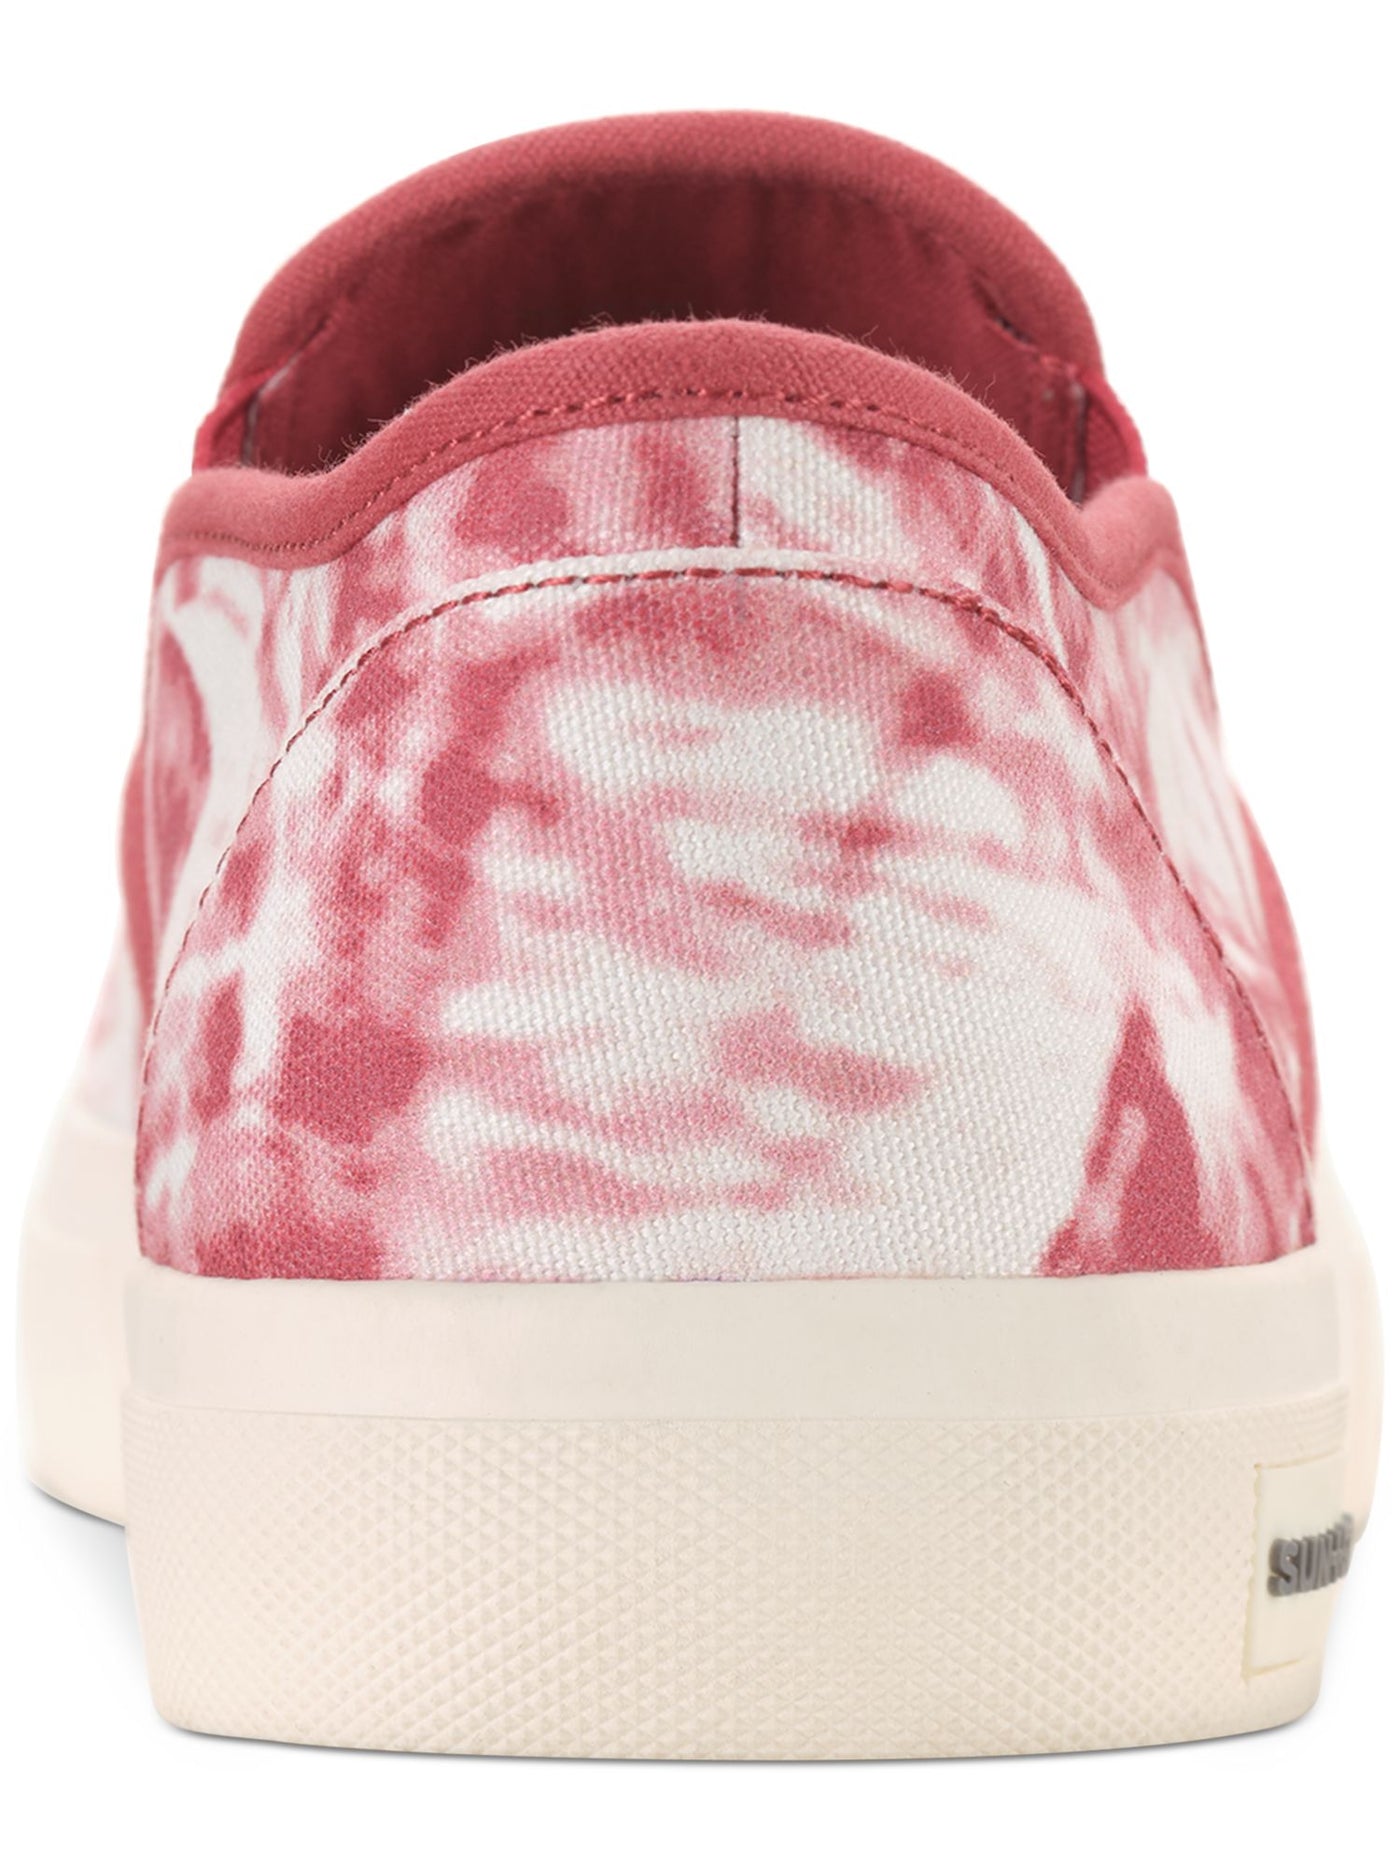 MADDEN Womens Red Tie Dye Padded Goring Reins Round Toe Platform Slip On Sneakers Shoes 8.5 M